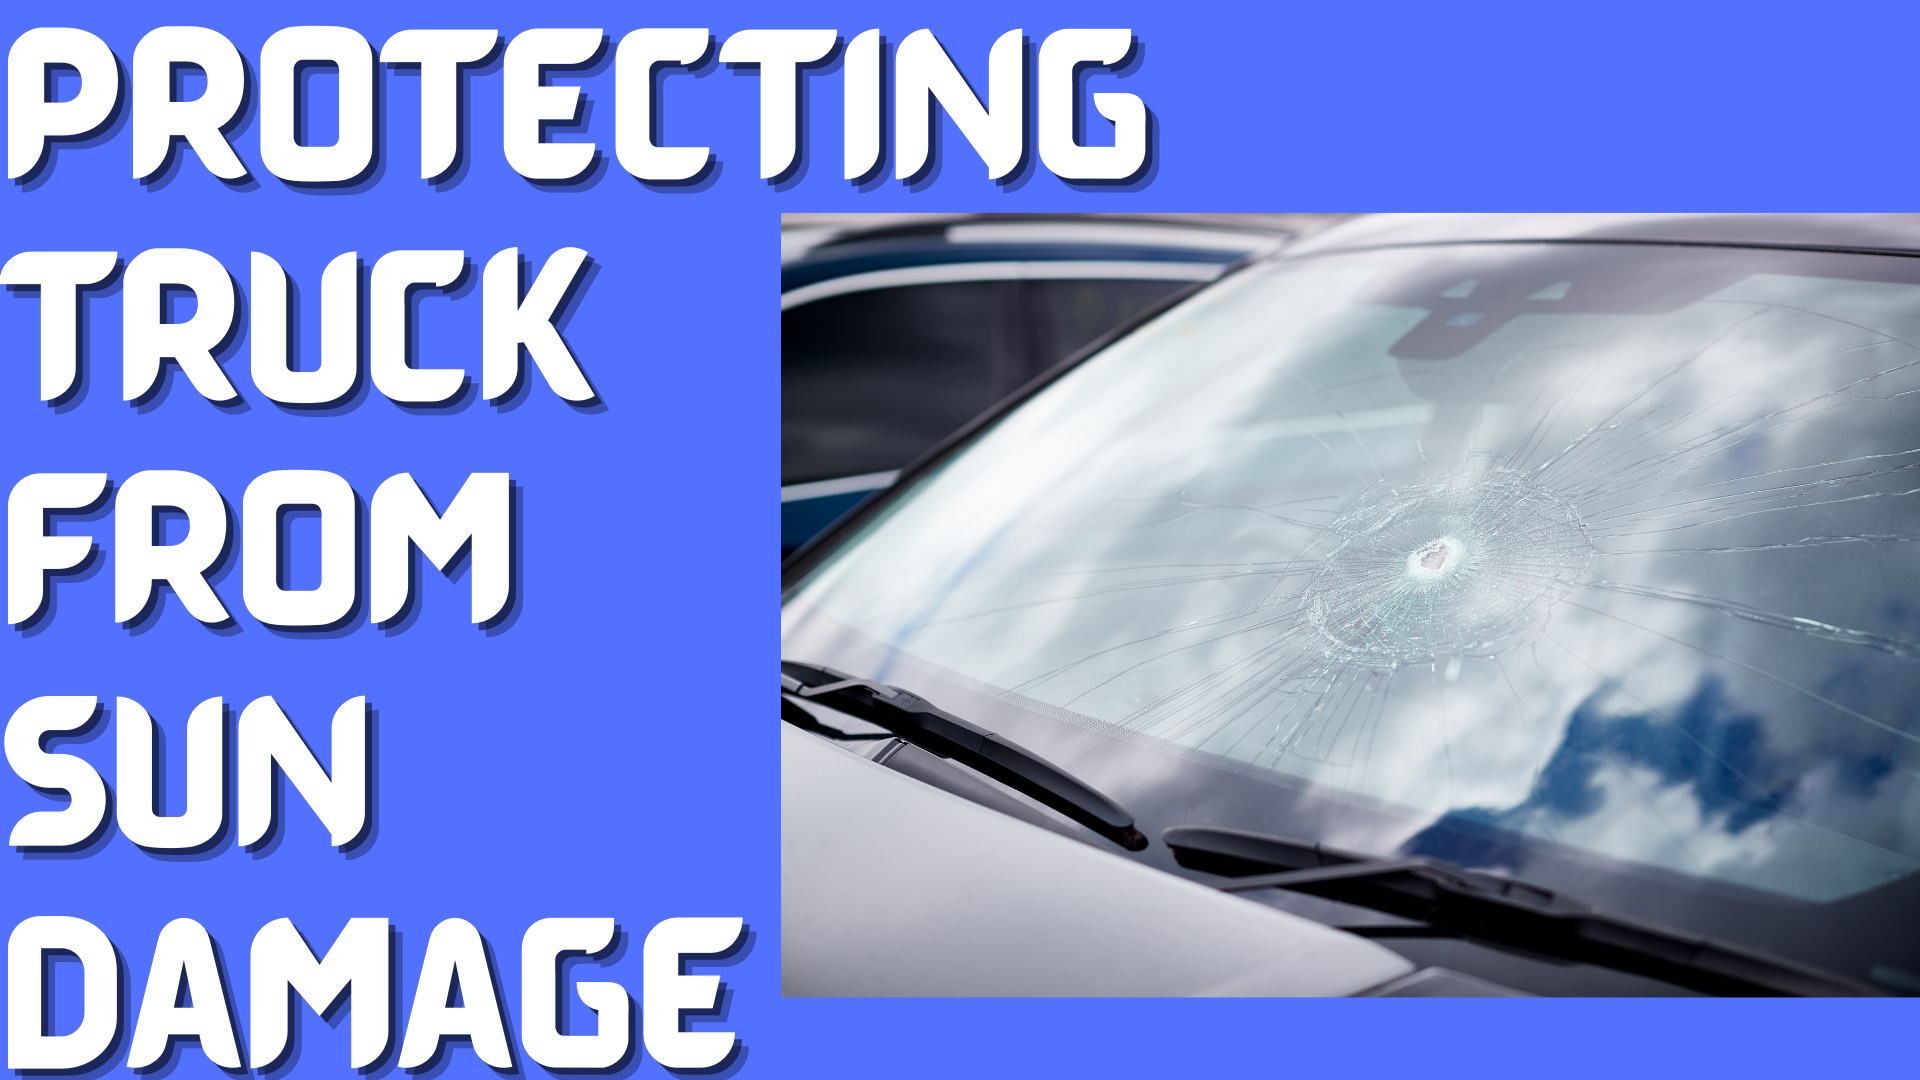 How Do You Protect Your Truck From Sun Damage?